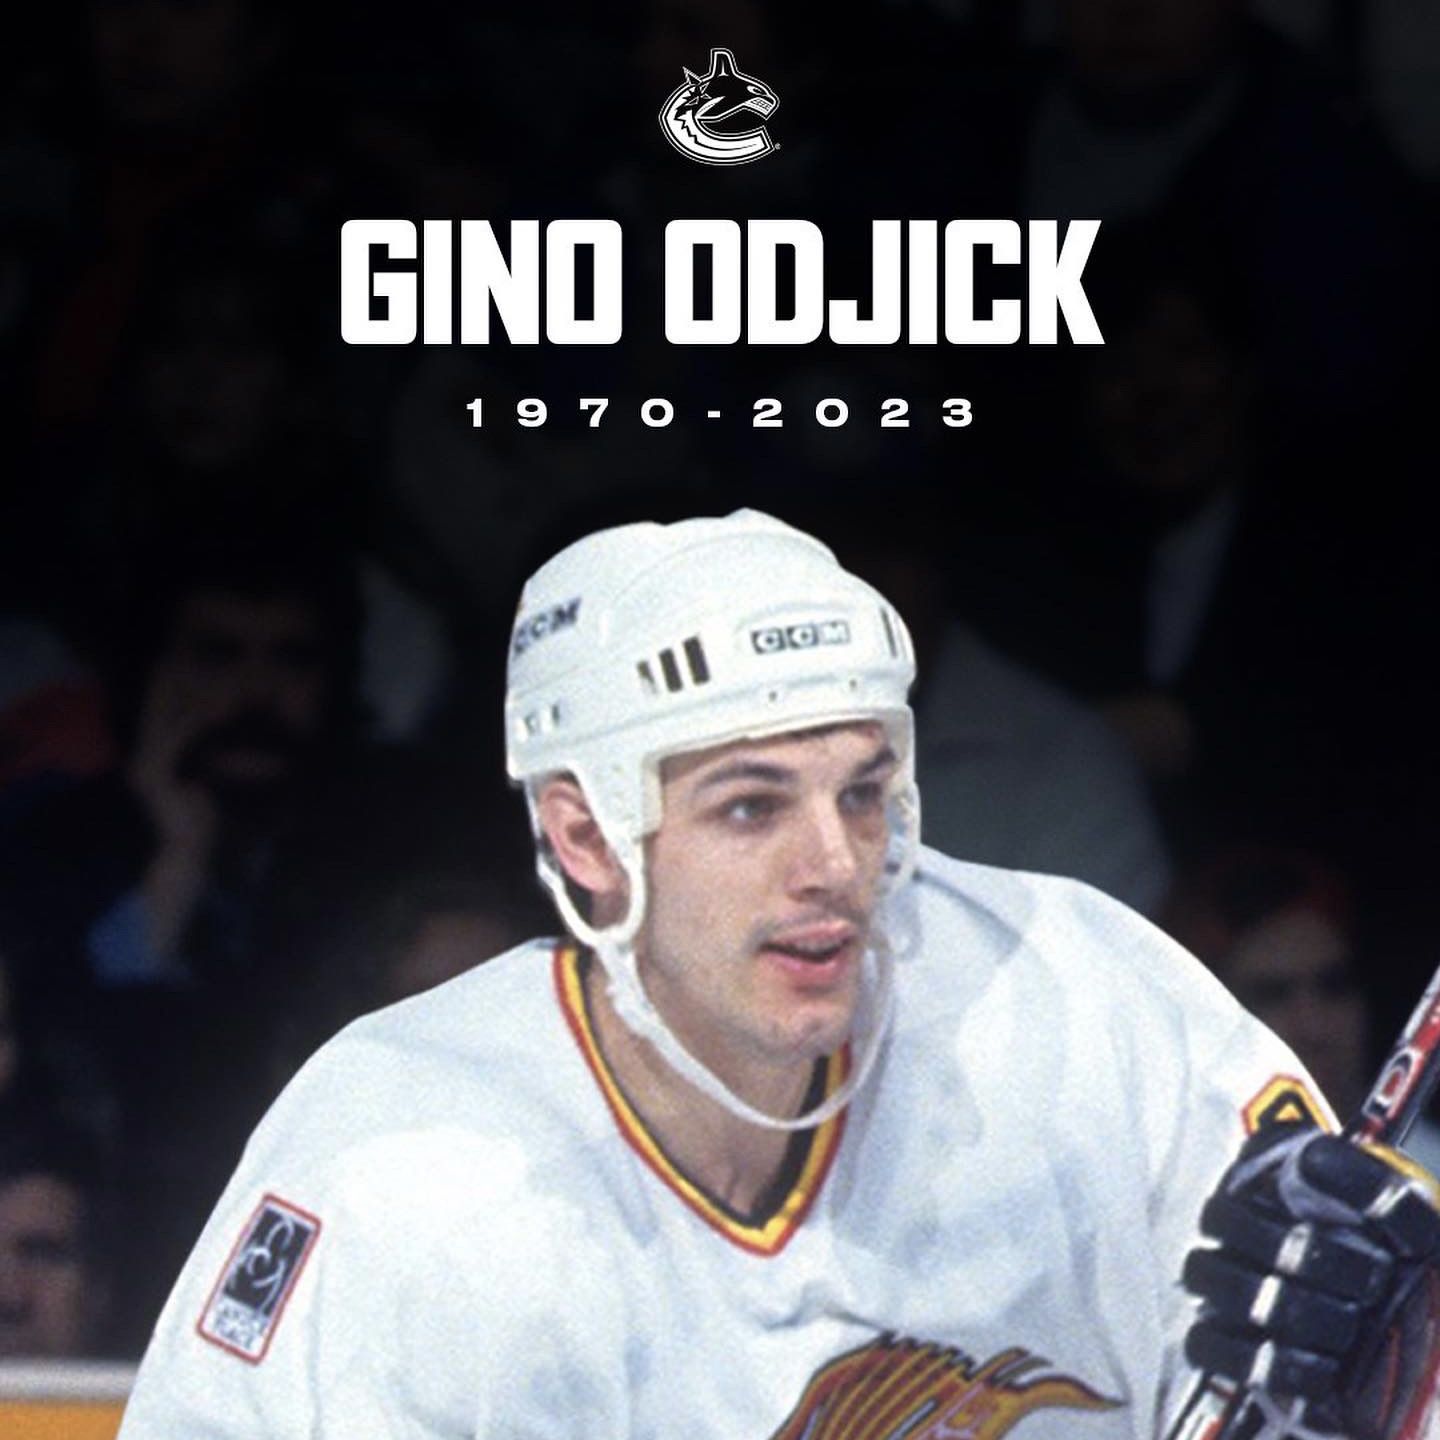 Photos: Former Canucks player Gino Odjick over the years